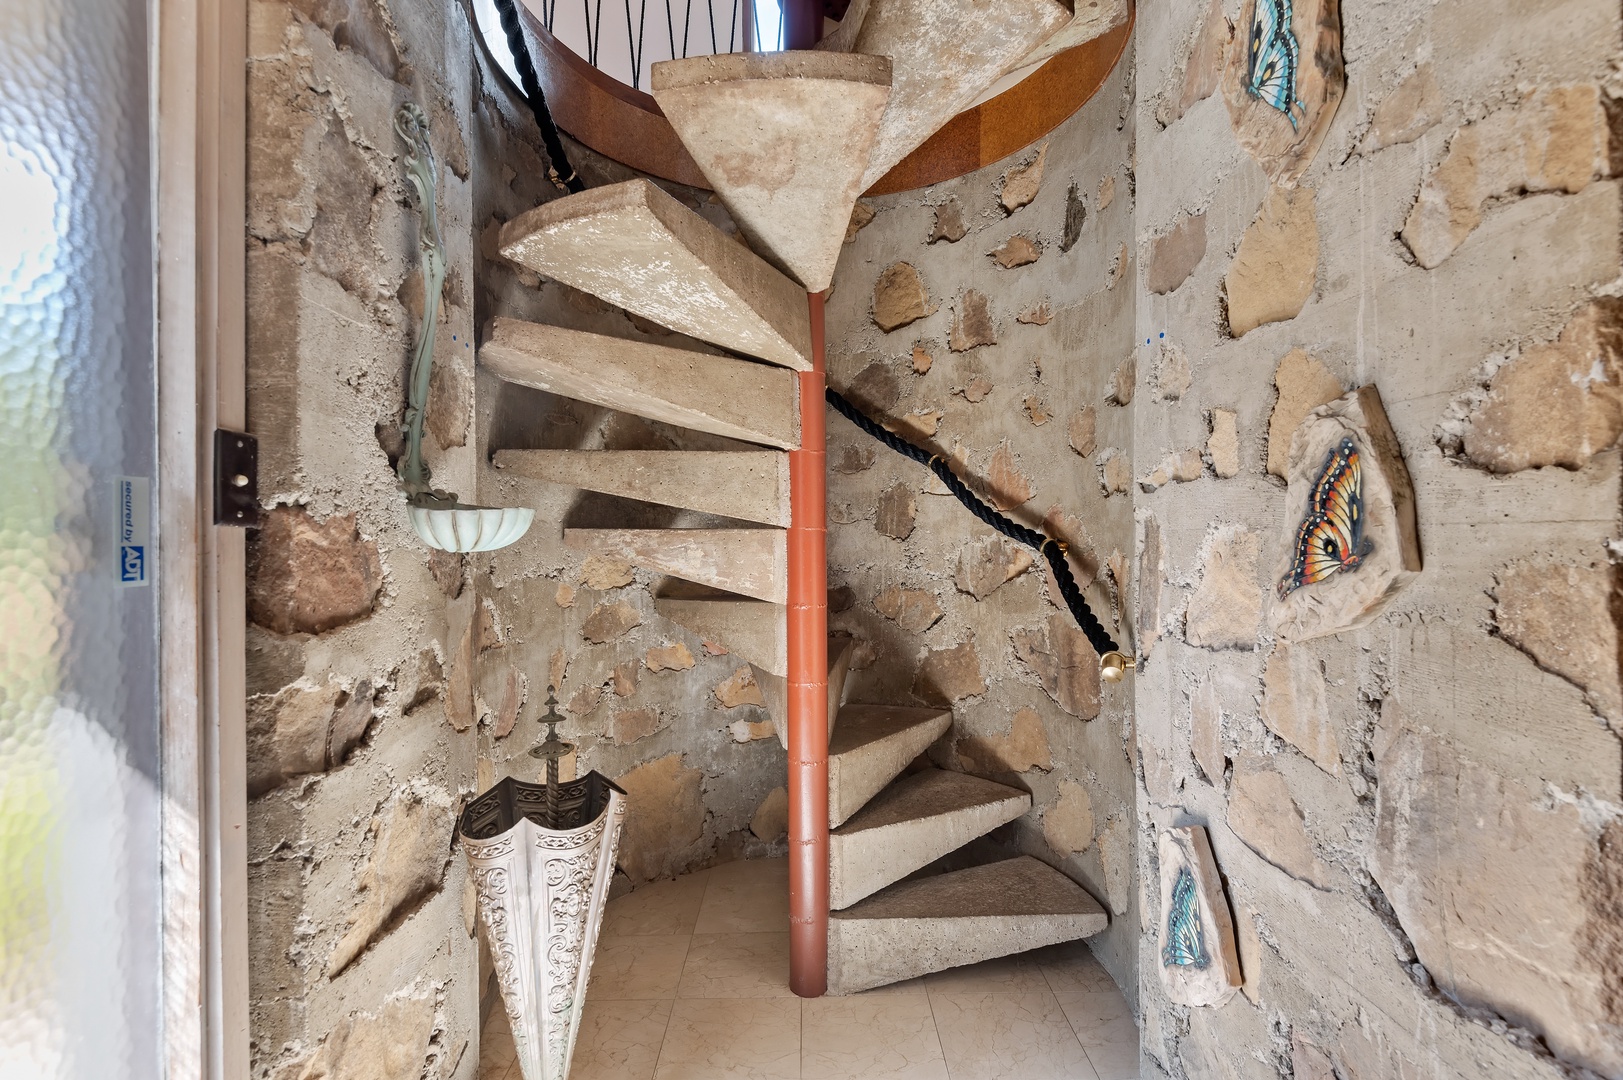 Once inside, you will be greeted by an extraordinary stone foyer and spiral staircase